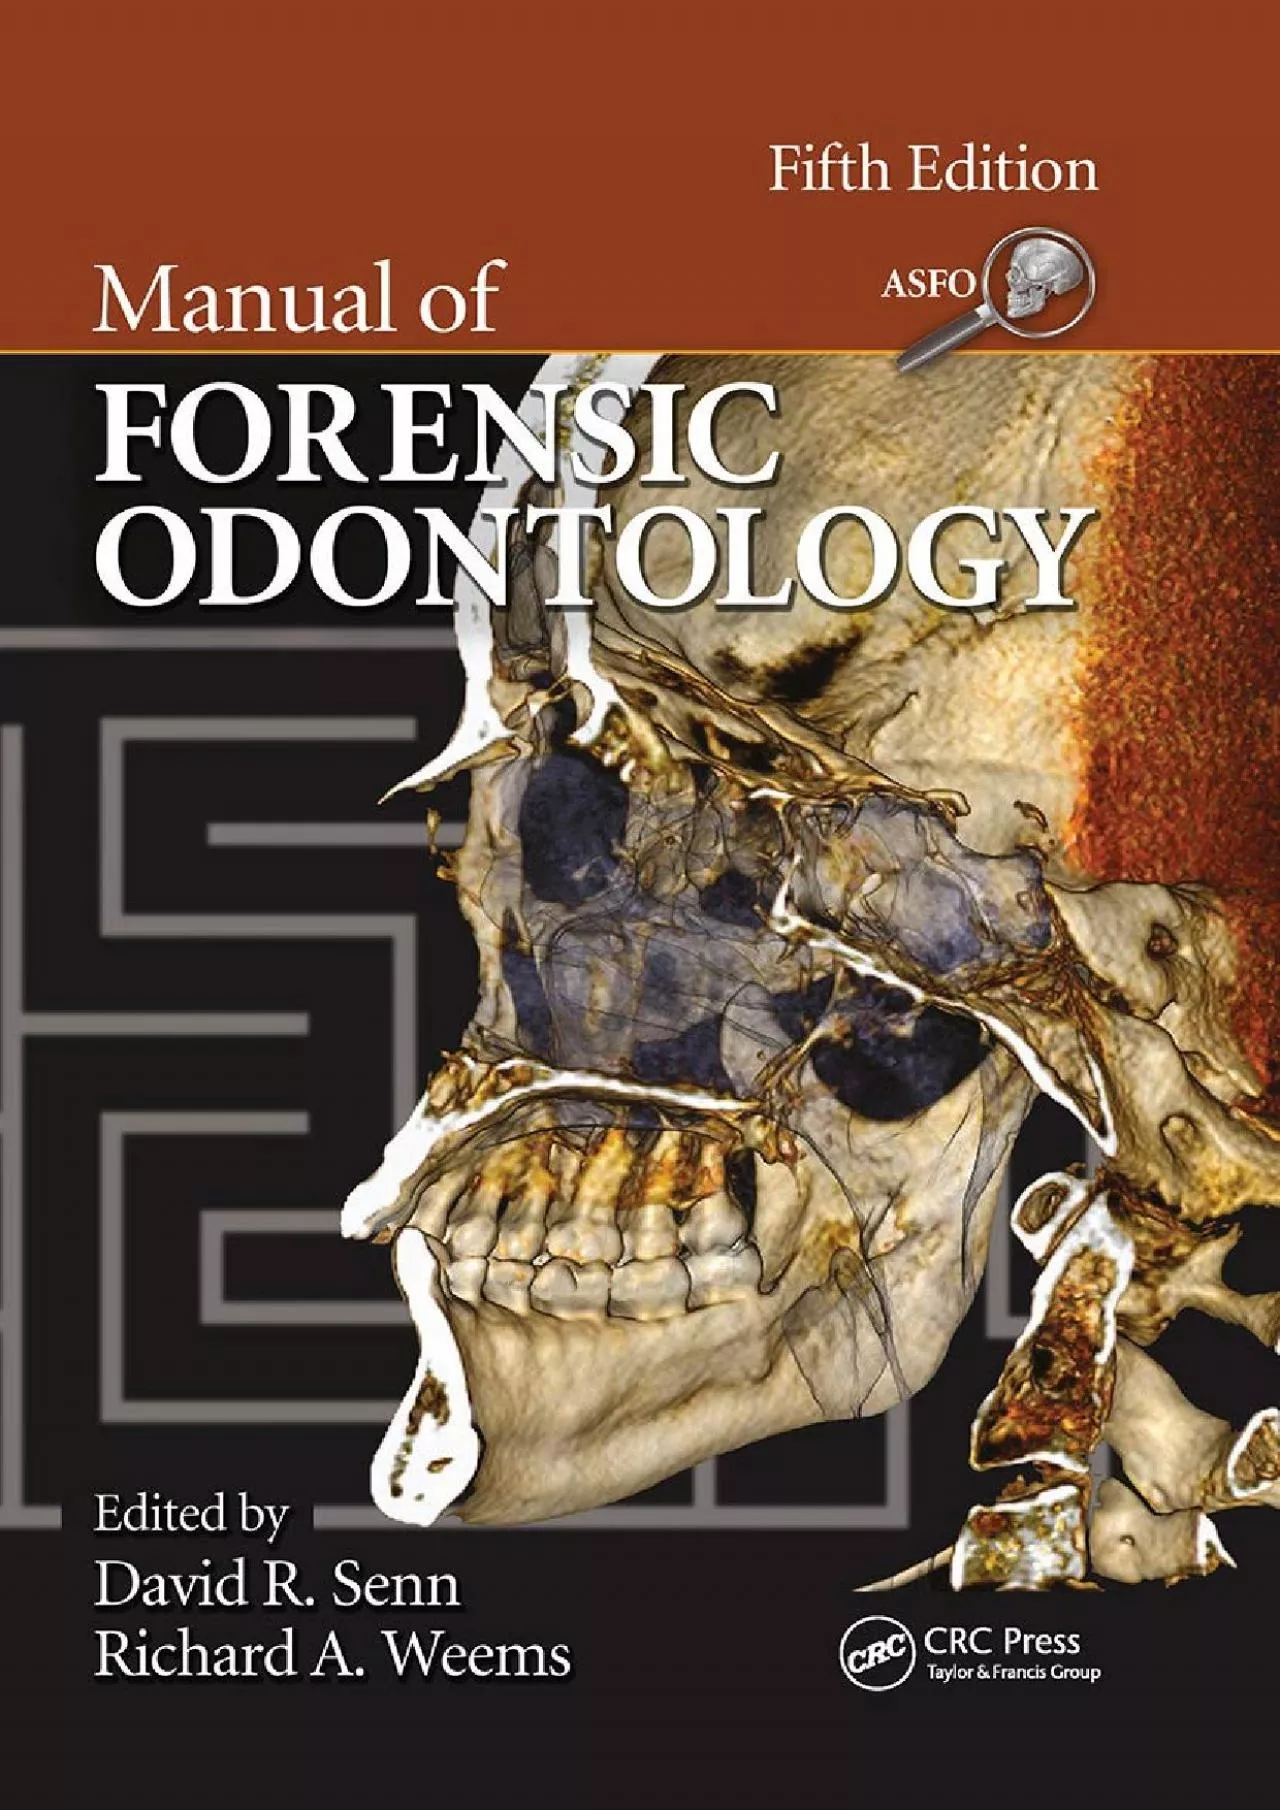 (BOOK)-Manual of Forensic Odontology